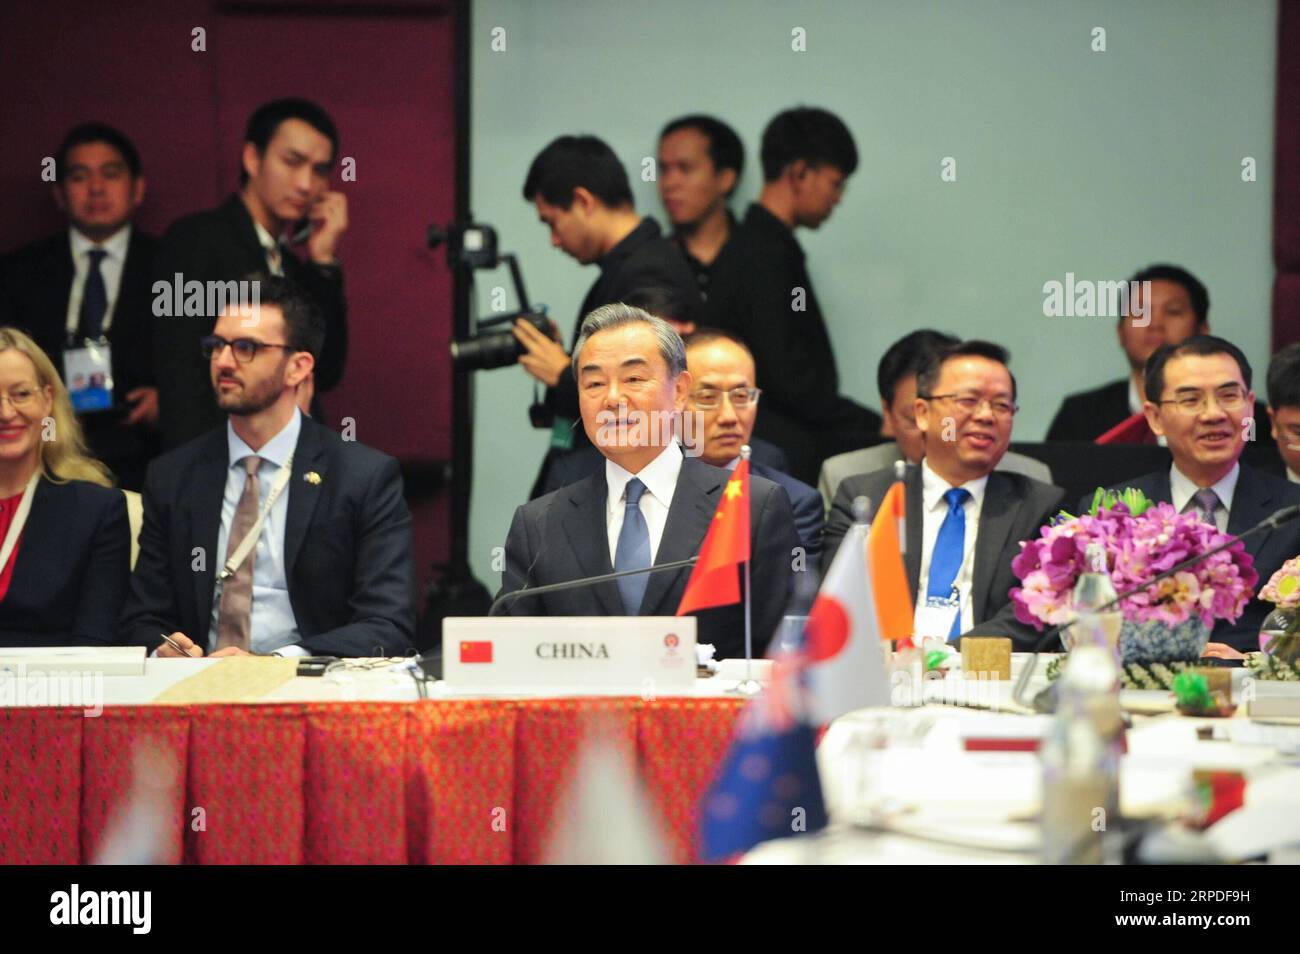 (190802) -- BANGKOK, Aug. 2, 2019 (Xinhua) -- Chinese State Councilor and Foreign Minister Wang Yi attends the 9th East Asia Summit Foreign Ministers Meeting in Bangkok, Thailand, Aug. 2, 2019. (Xinhua/Rachen Sageamsak) THAILAND-BANGKOK-WANG YI-EAST ASIA SUMMIT-FOREIGN MINISTERS-MEETING PUBLICATIONxNOTxINxCHN Stock Photo